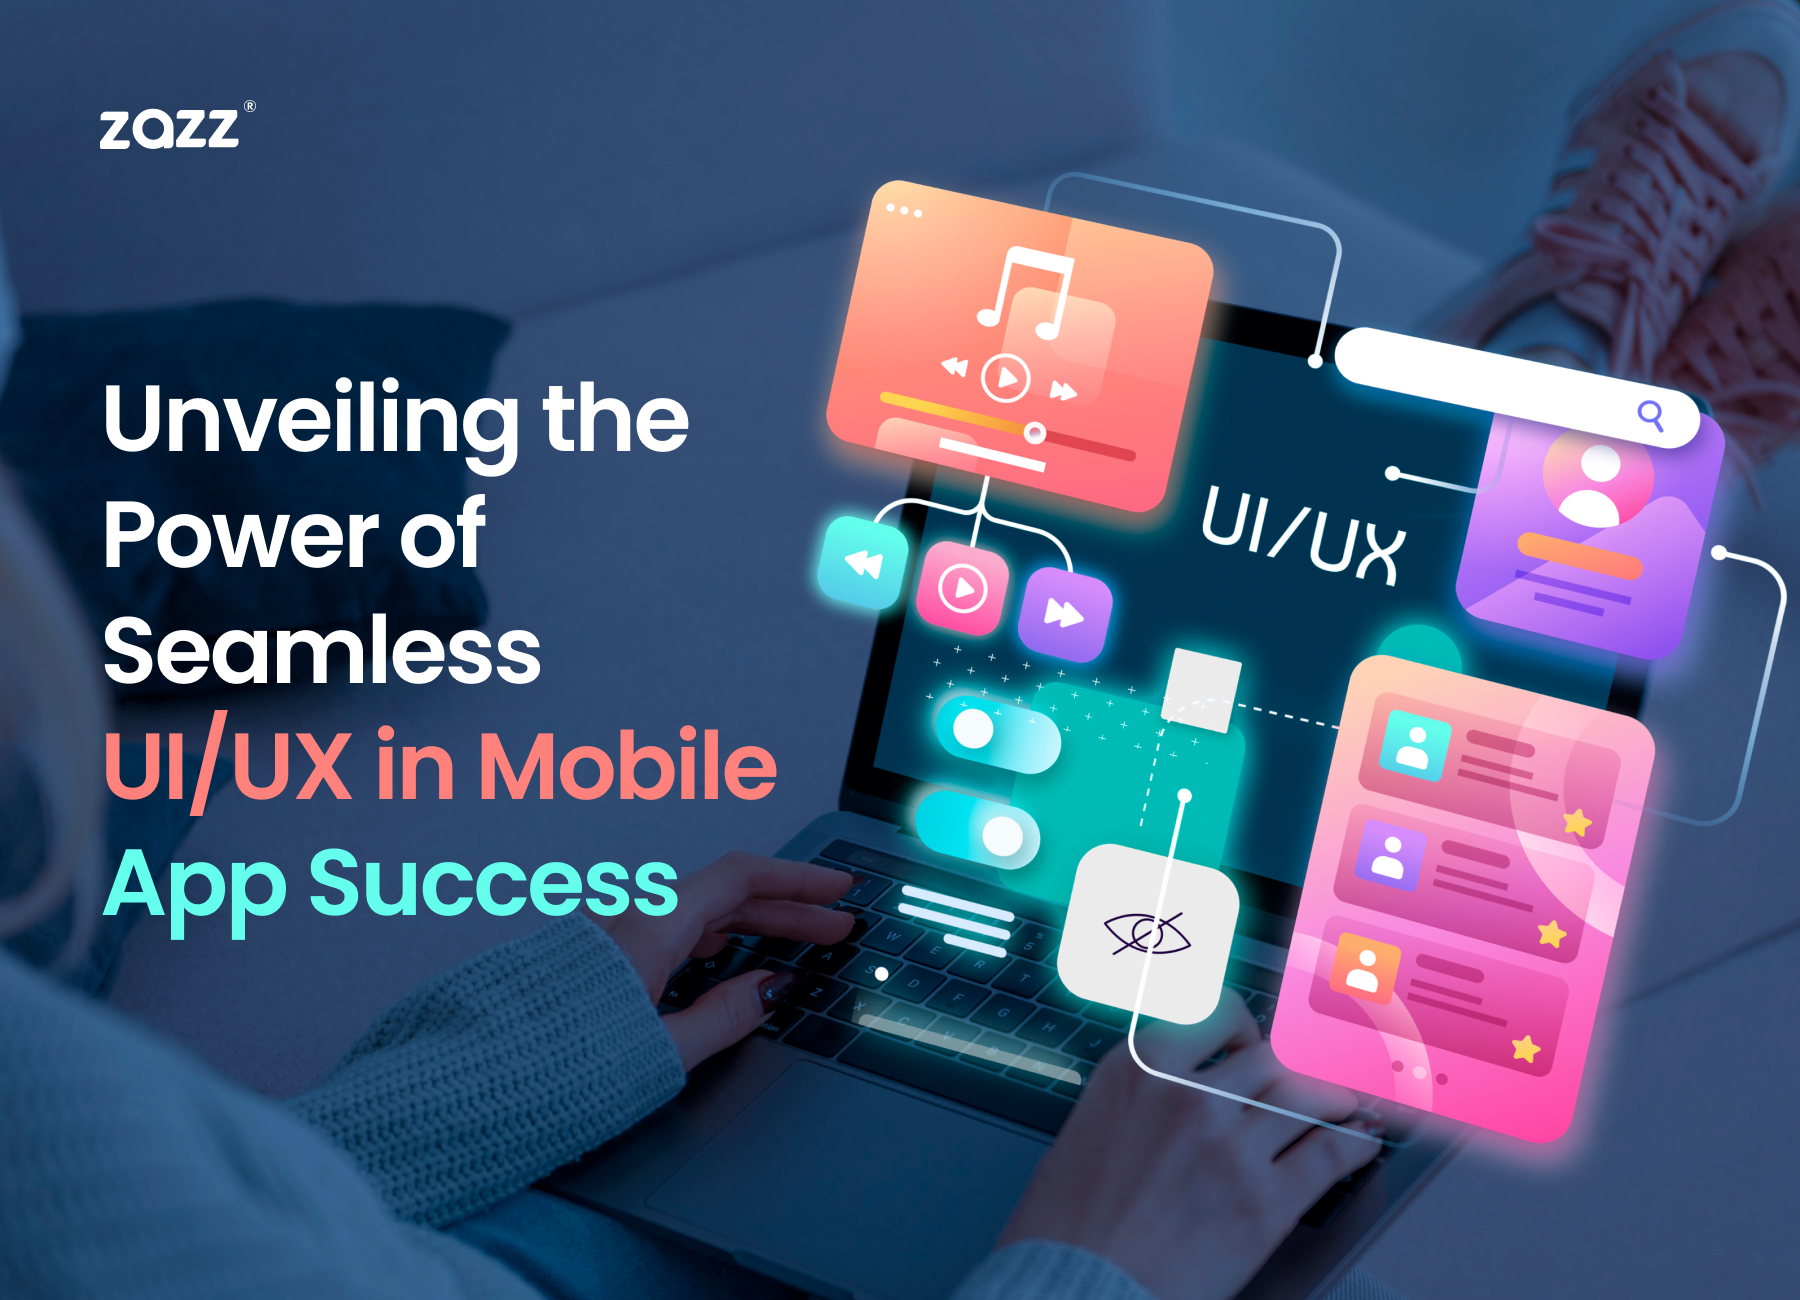 Unveiling the Power of Seamless UI/UX in Mobile App Success